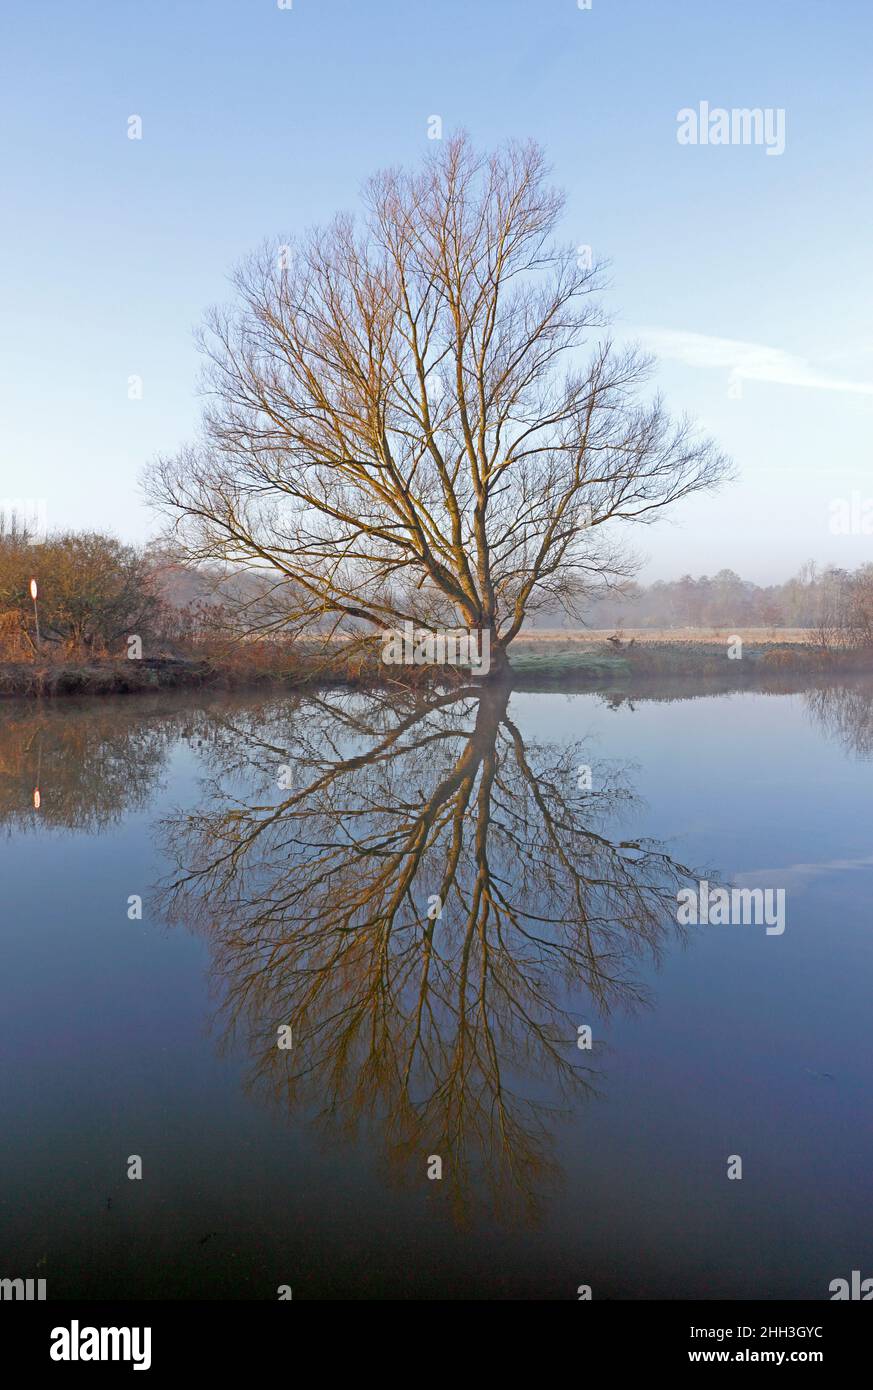 A frosty morning in winter by the River Bure with a Willow tree and reflection at Coltishall Common, Coltishall, Norfolk, England, United Kingdom. Stock Photo